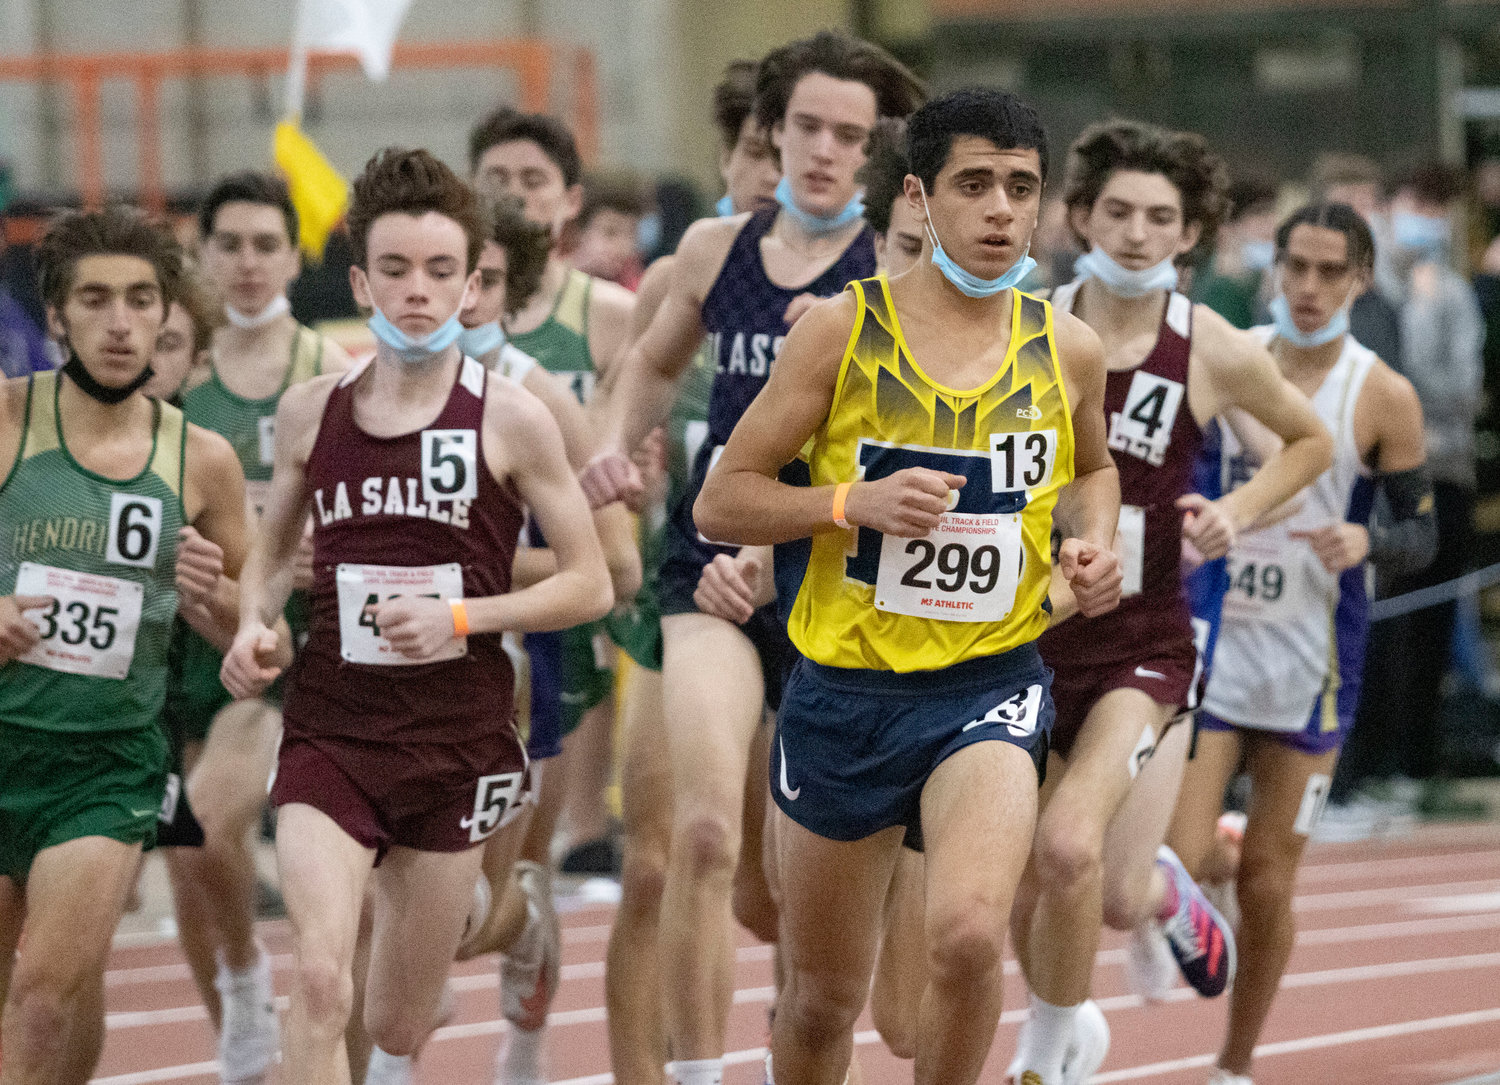 Brandon Piedade (number 299), shown running in an indoor track meet last year, leads the Barrington High School boys cross country team this fall.